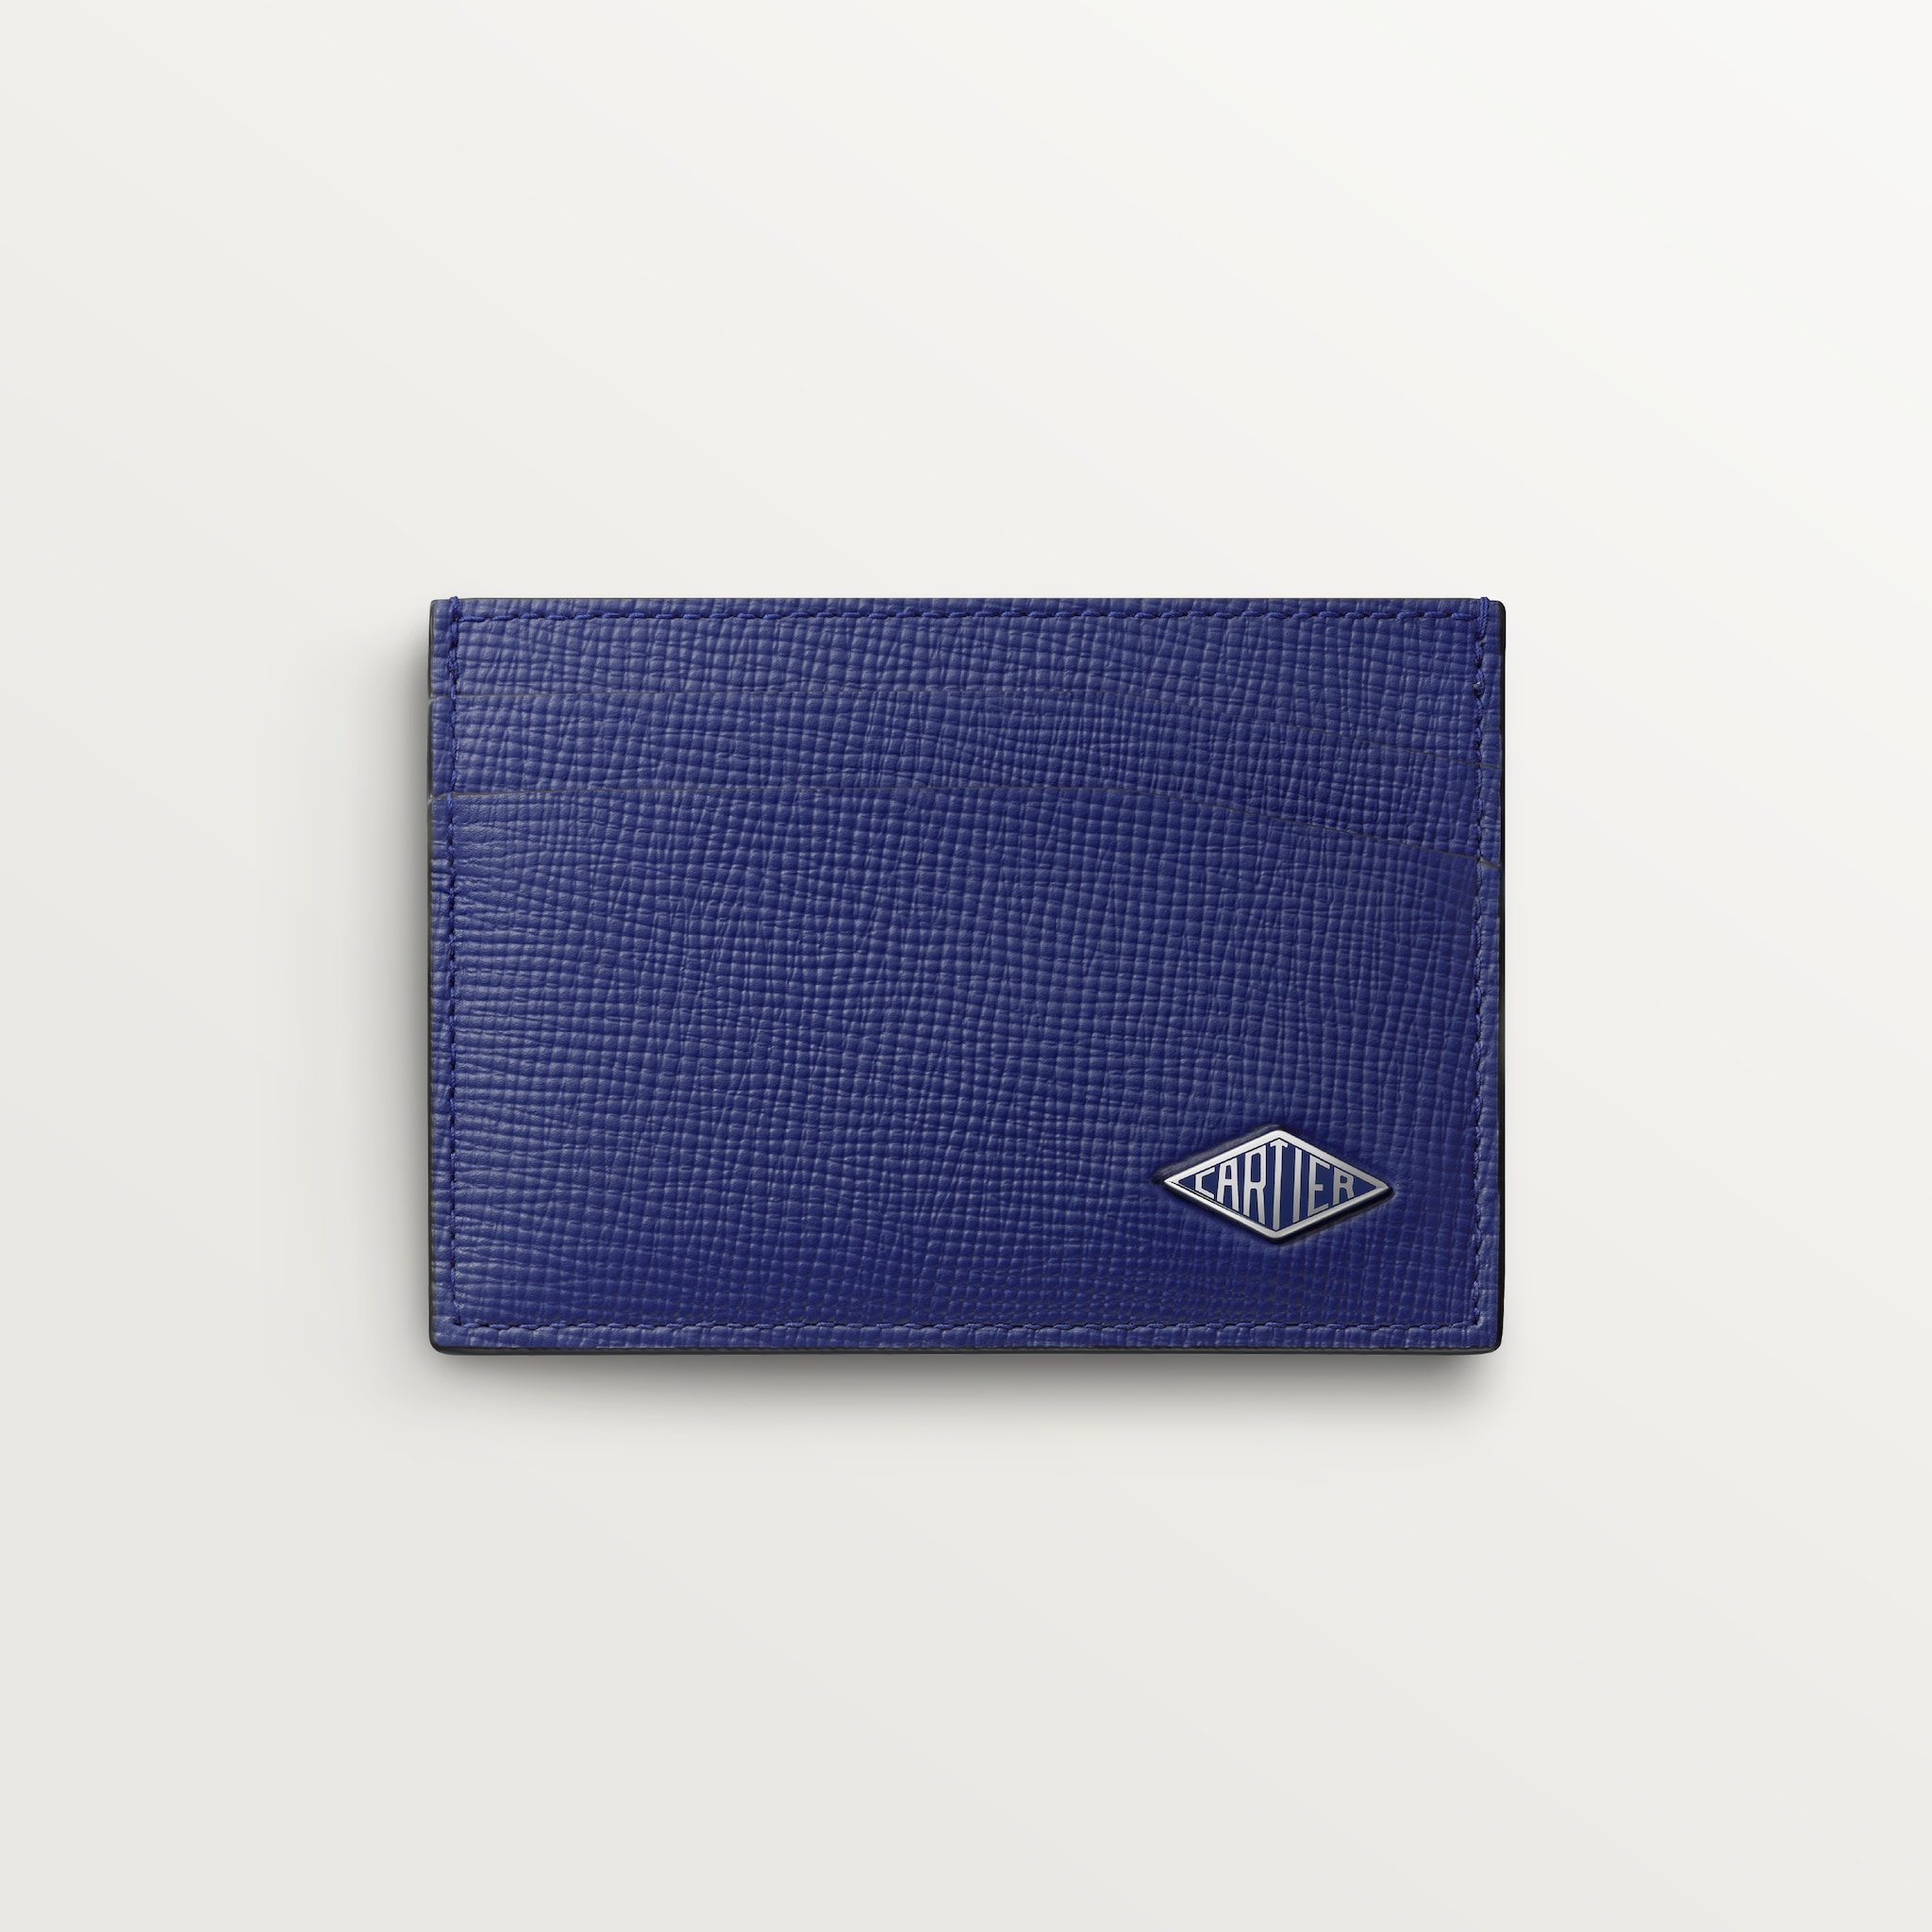 CRL3002124 - Cartier Losange Small Leather Goods, Card holder - Grained ...